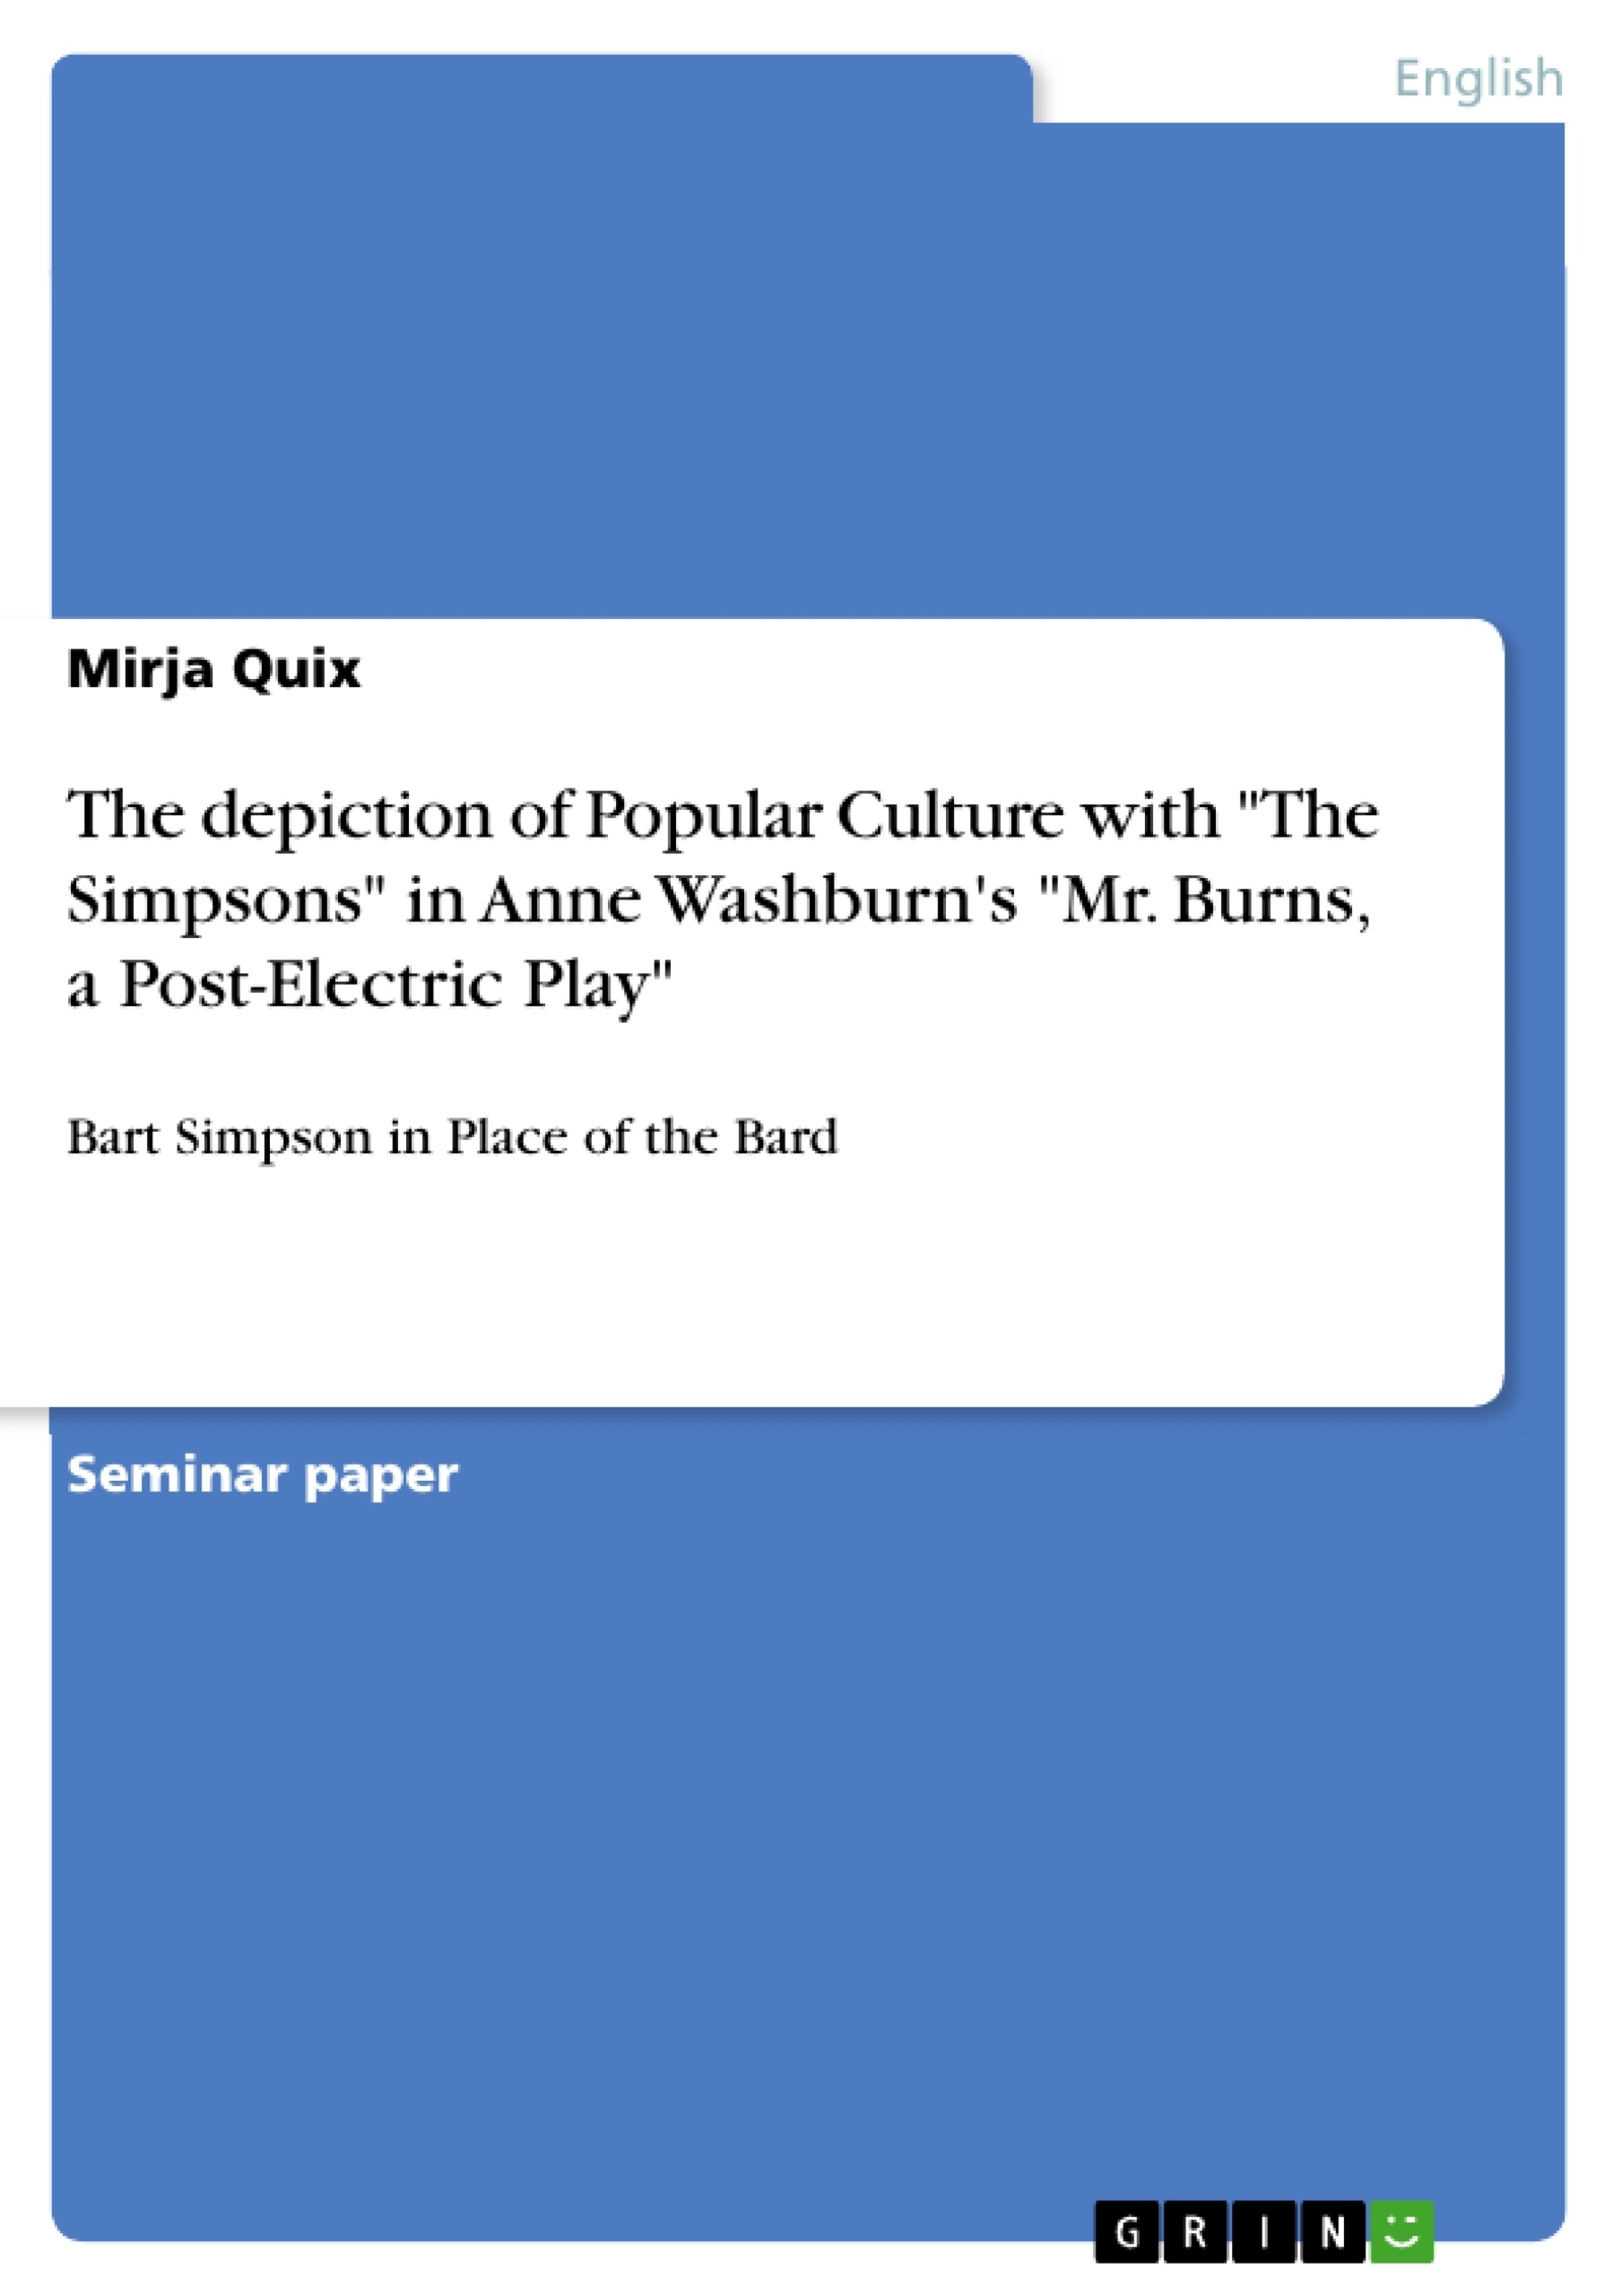 Title: The depiction of Popular Culture with "The Simpsons" in Anne Washburn's "Mr. Burns, a Post-Electric Play"